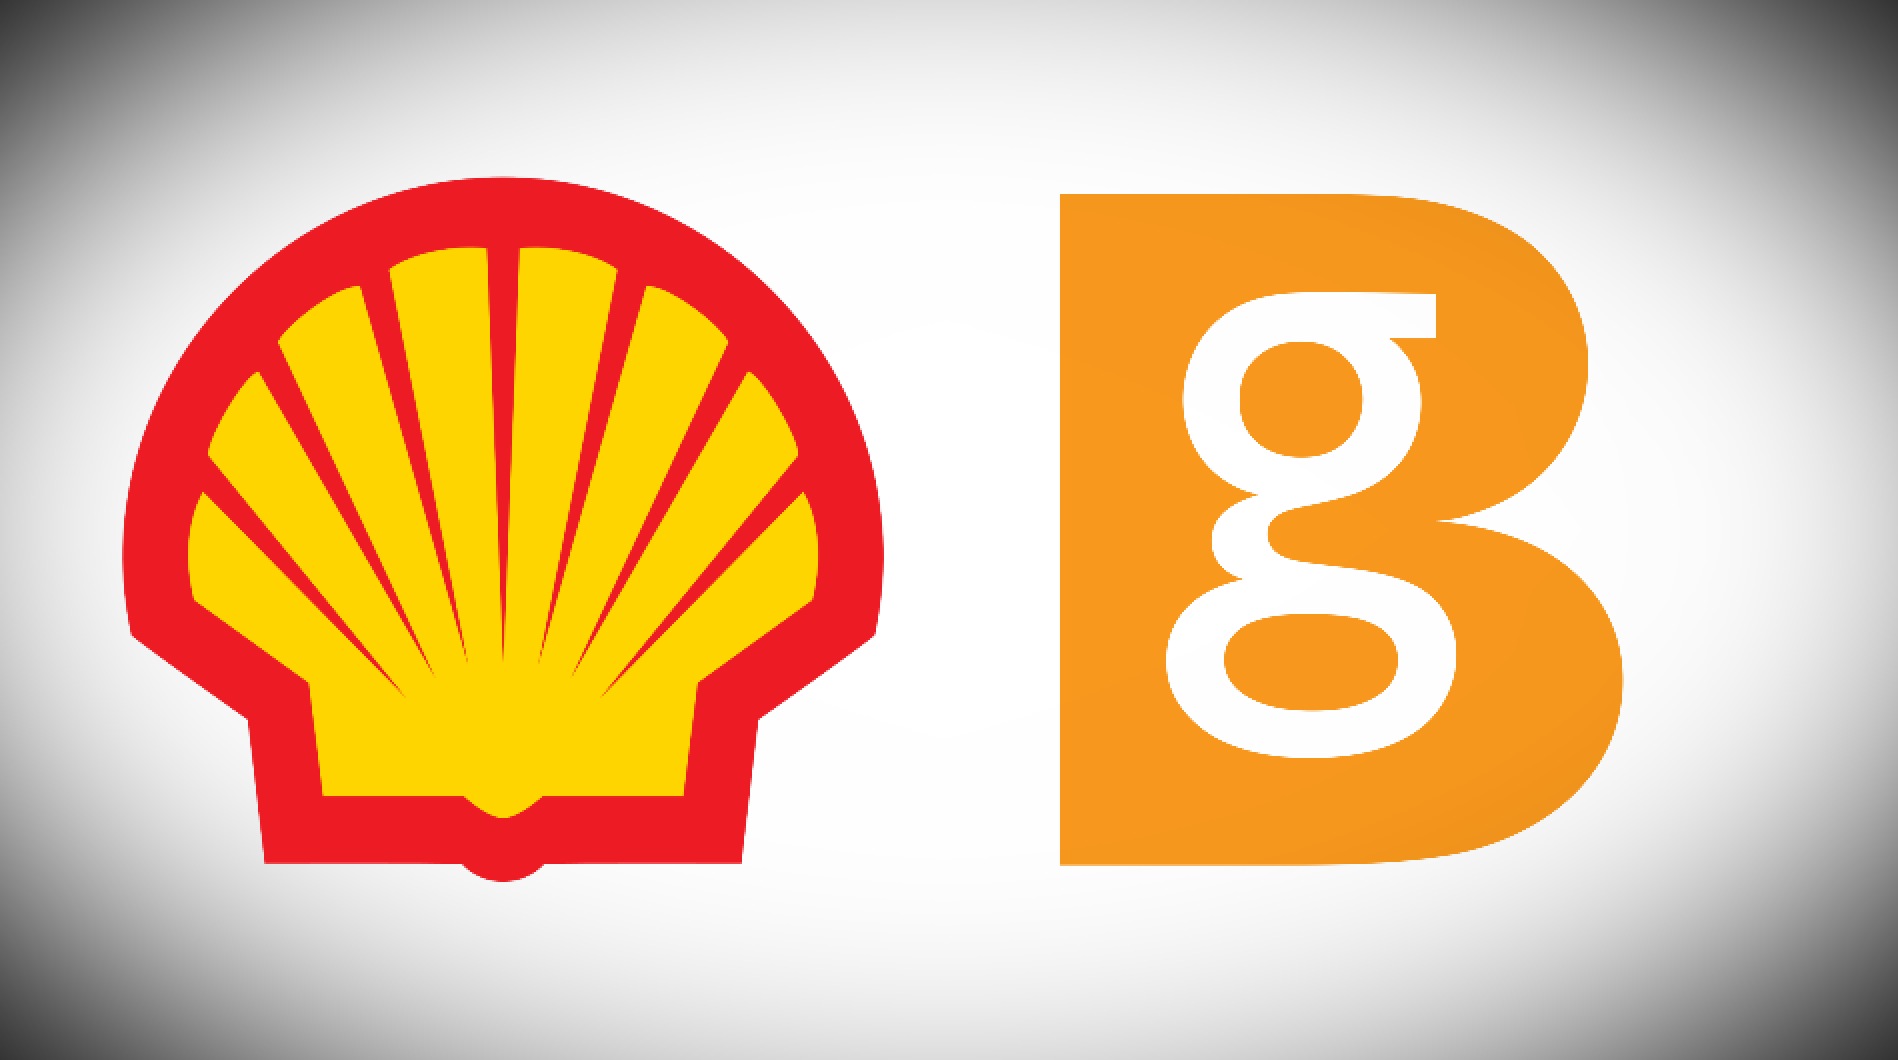 5 key things about Shell-BG oil merger